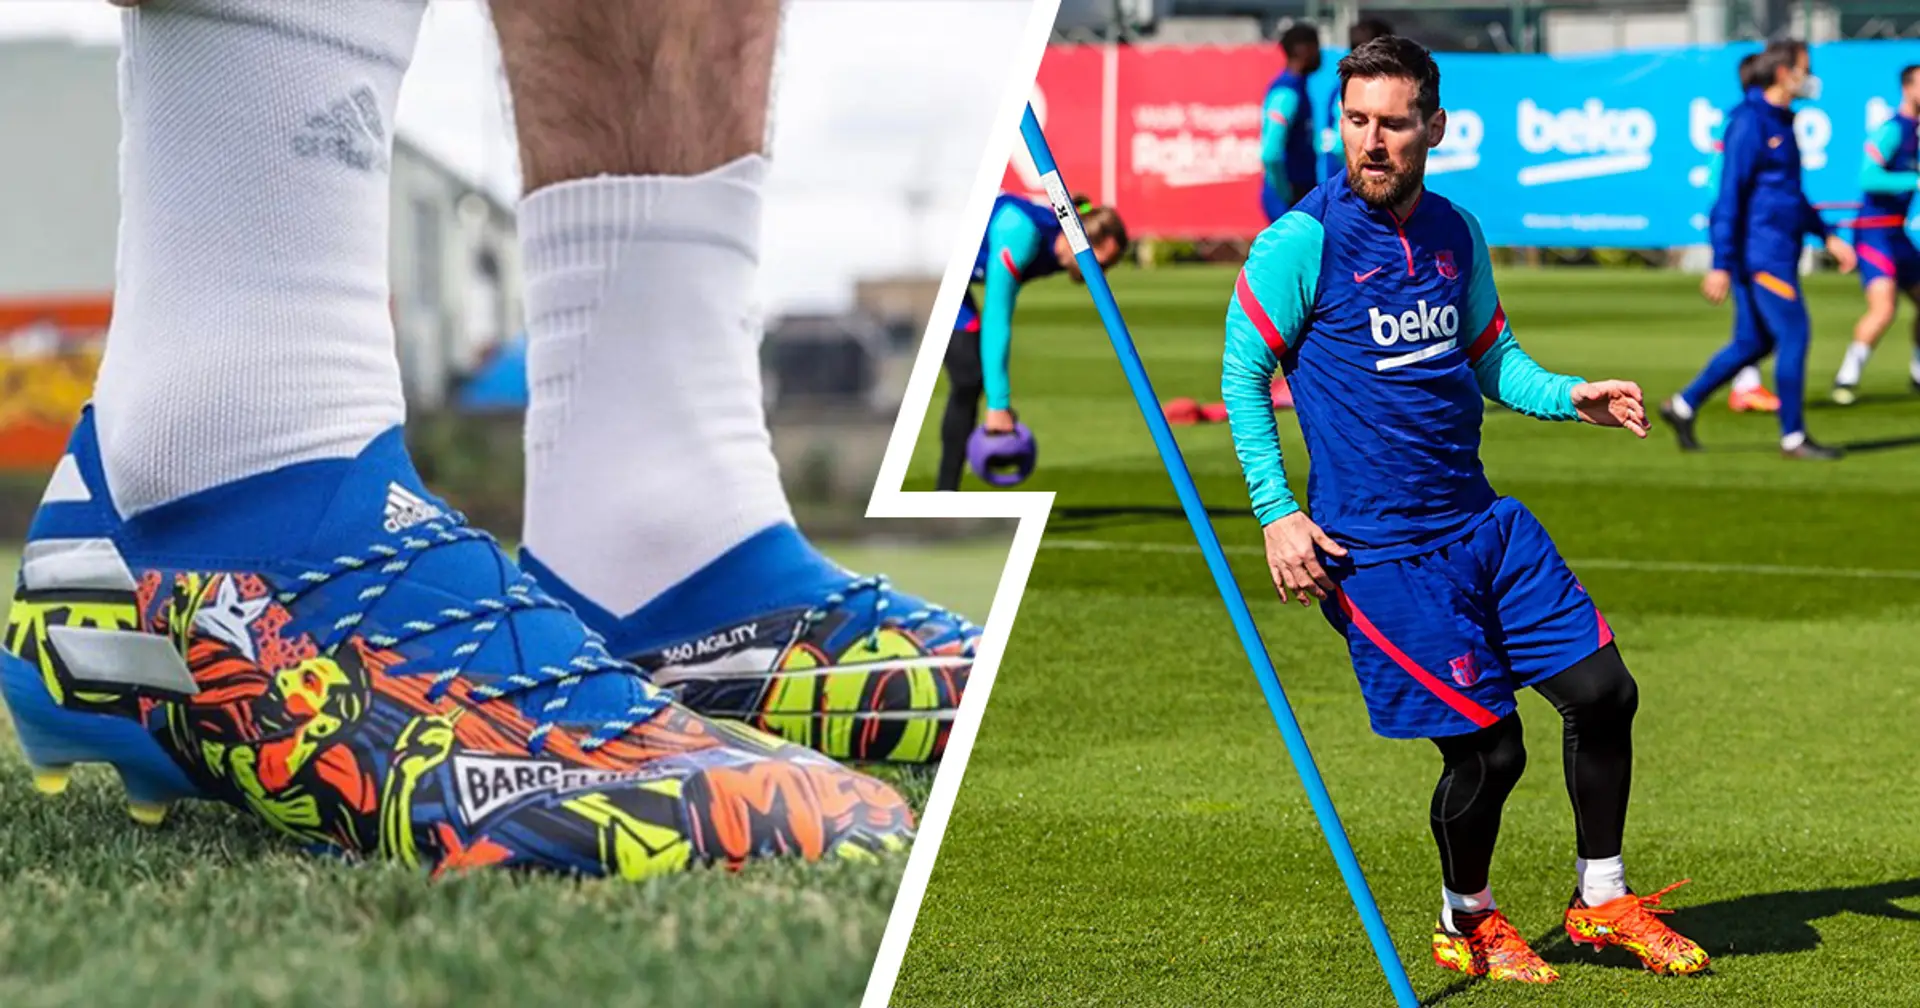 brand new Adidas boots in 2020/21 season: design and other things to know - Football | Tribuna.com